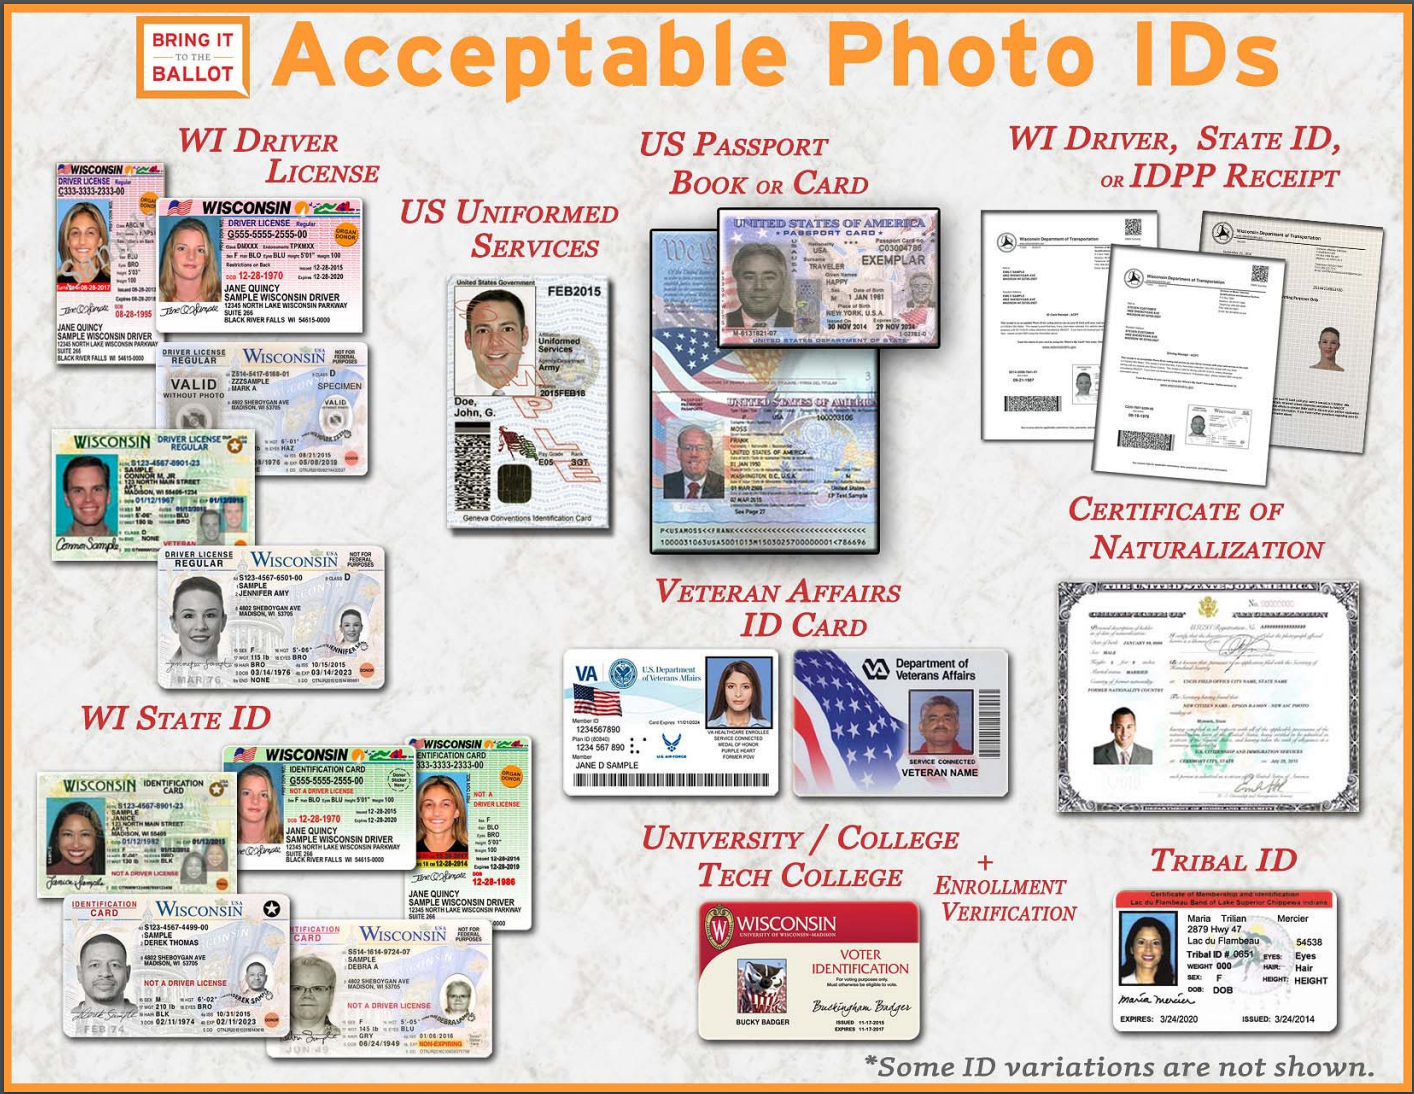 Wisconsin Acceptable Photo IDs